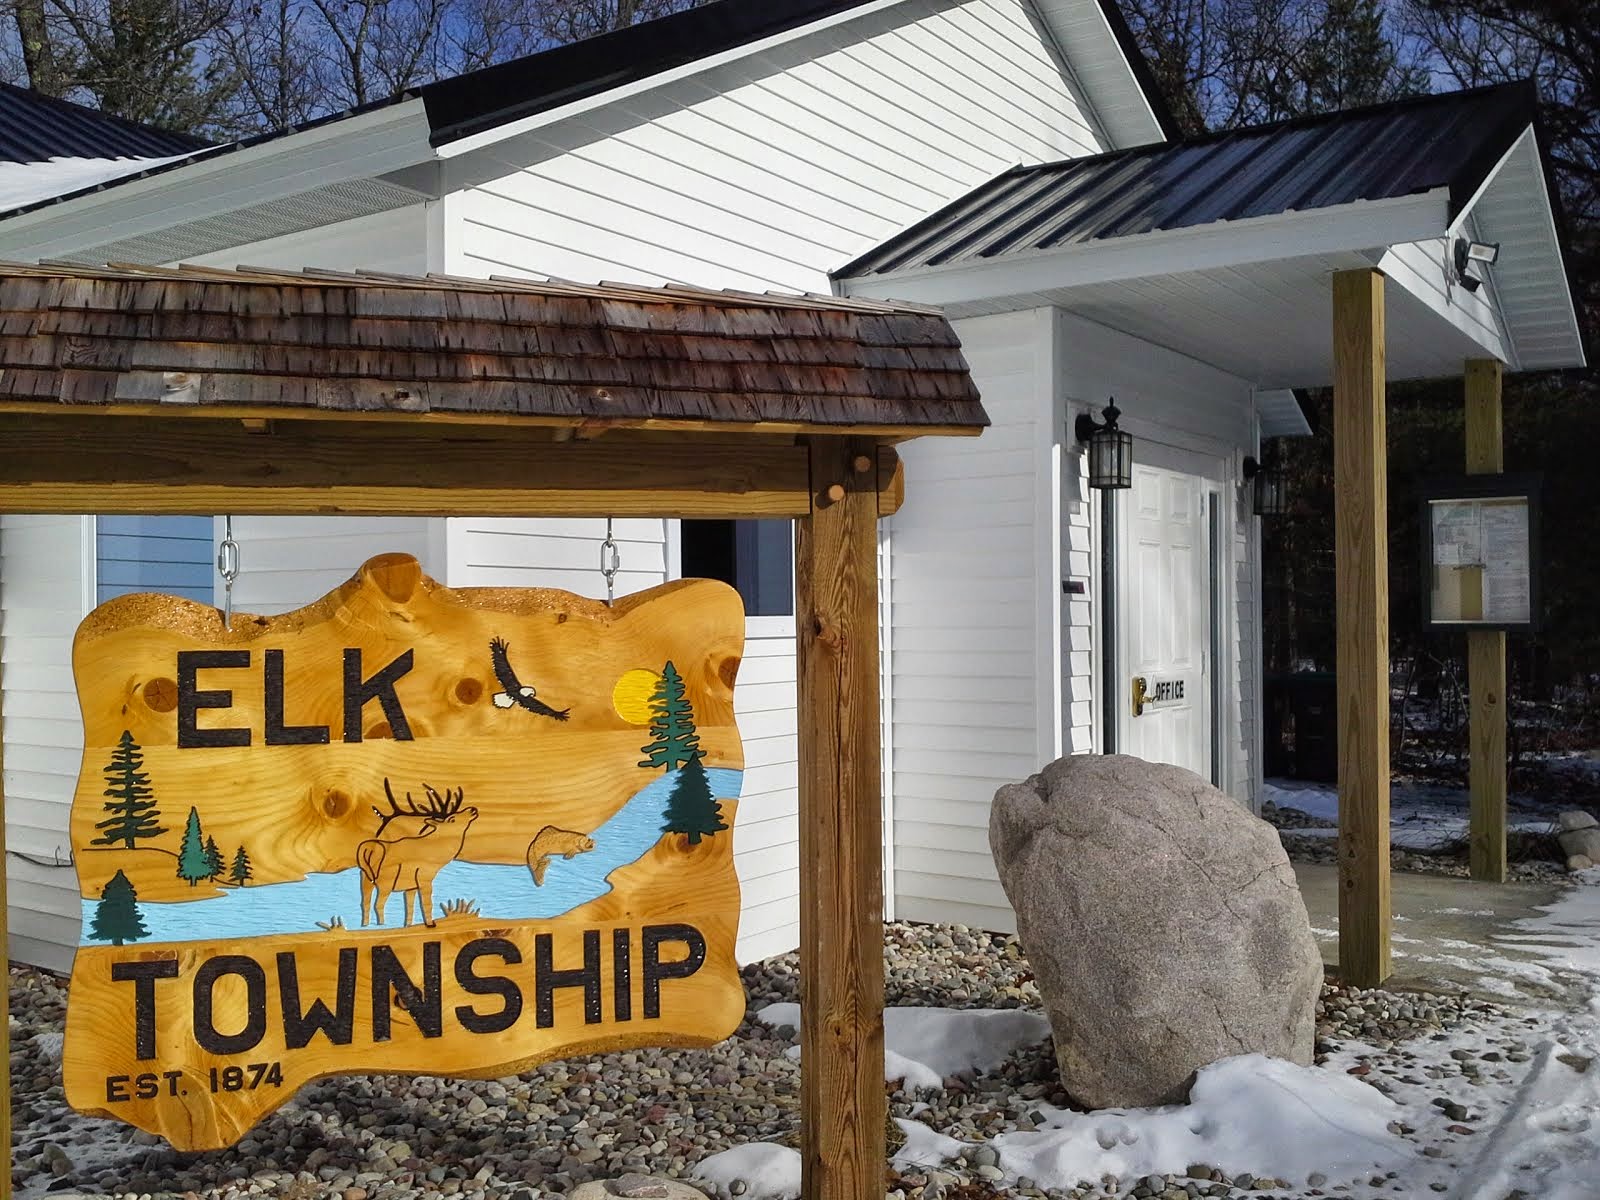 Offices of Elk Township